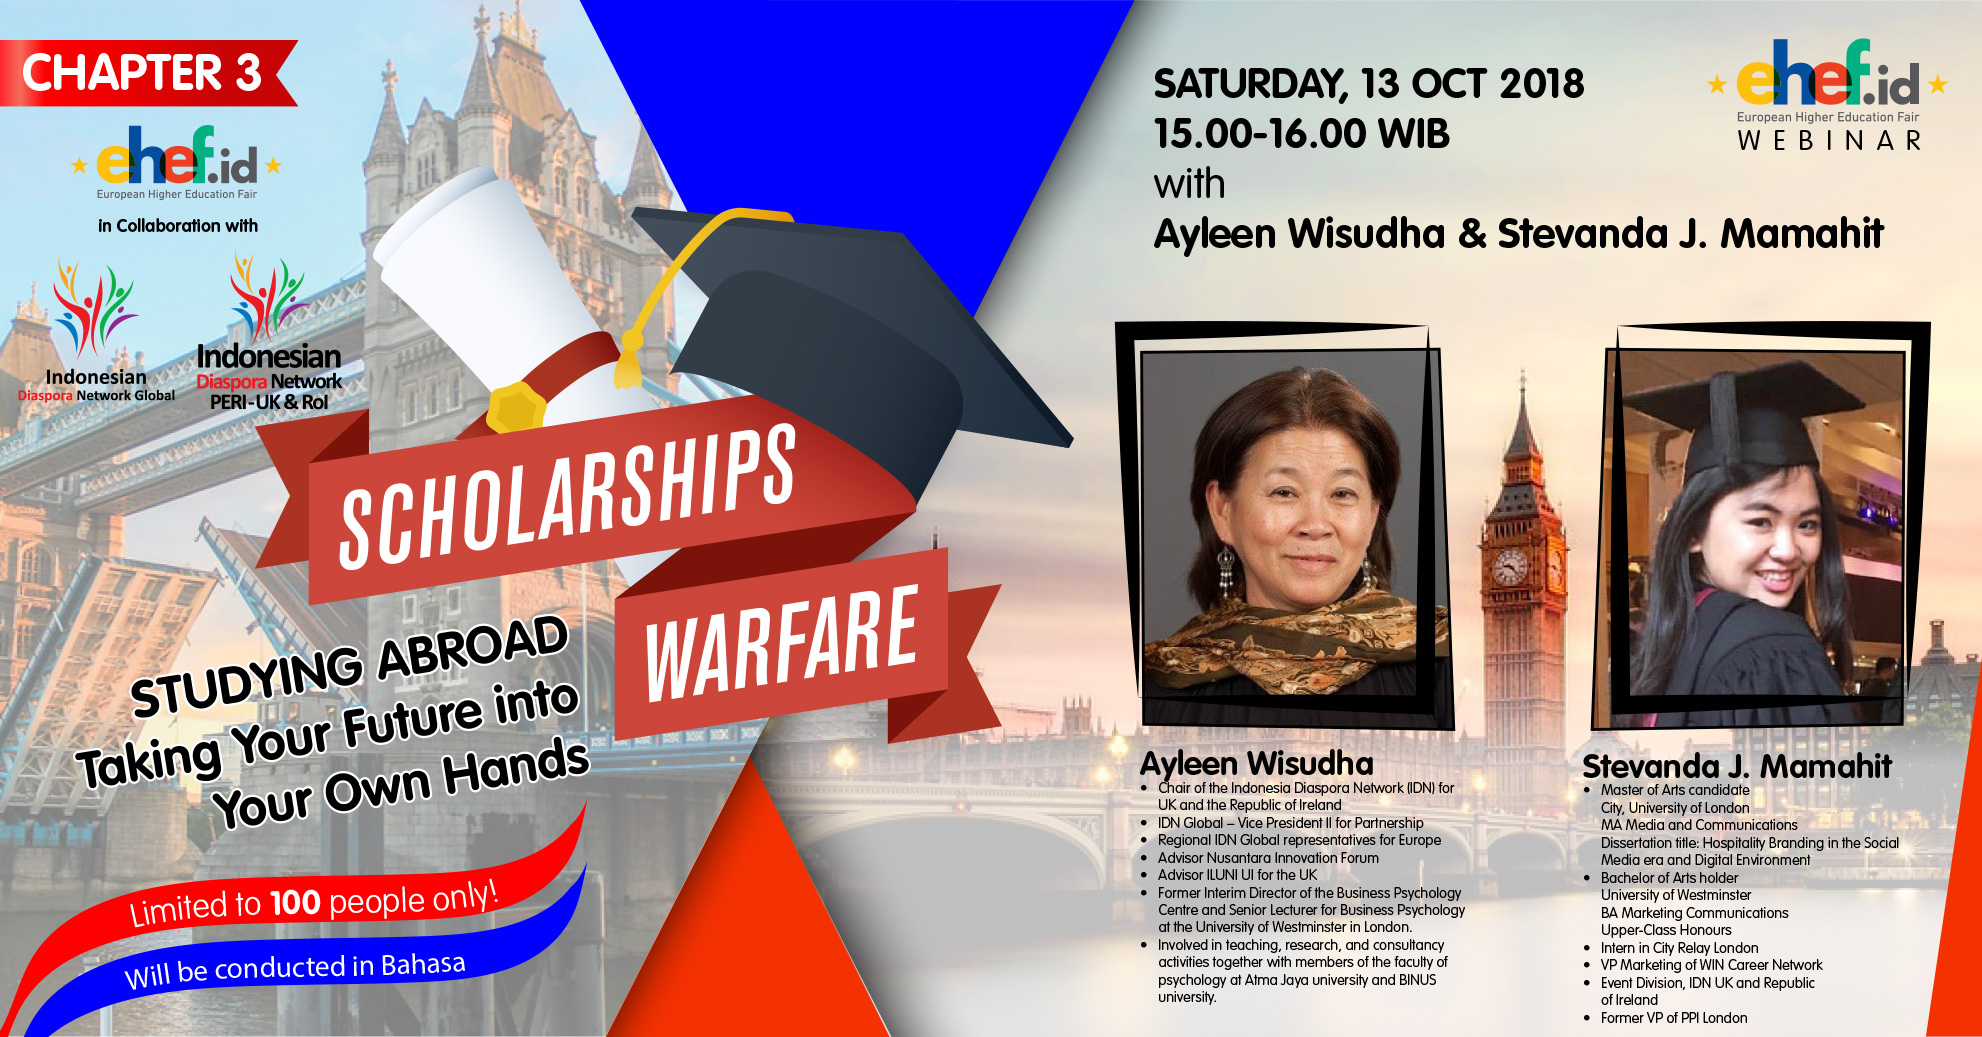 SCHOLARSHIPS WARFARE Chapter 3: Studying Abroad - Taking Your Future Into Your Own Hands